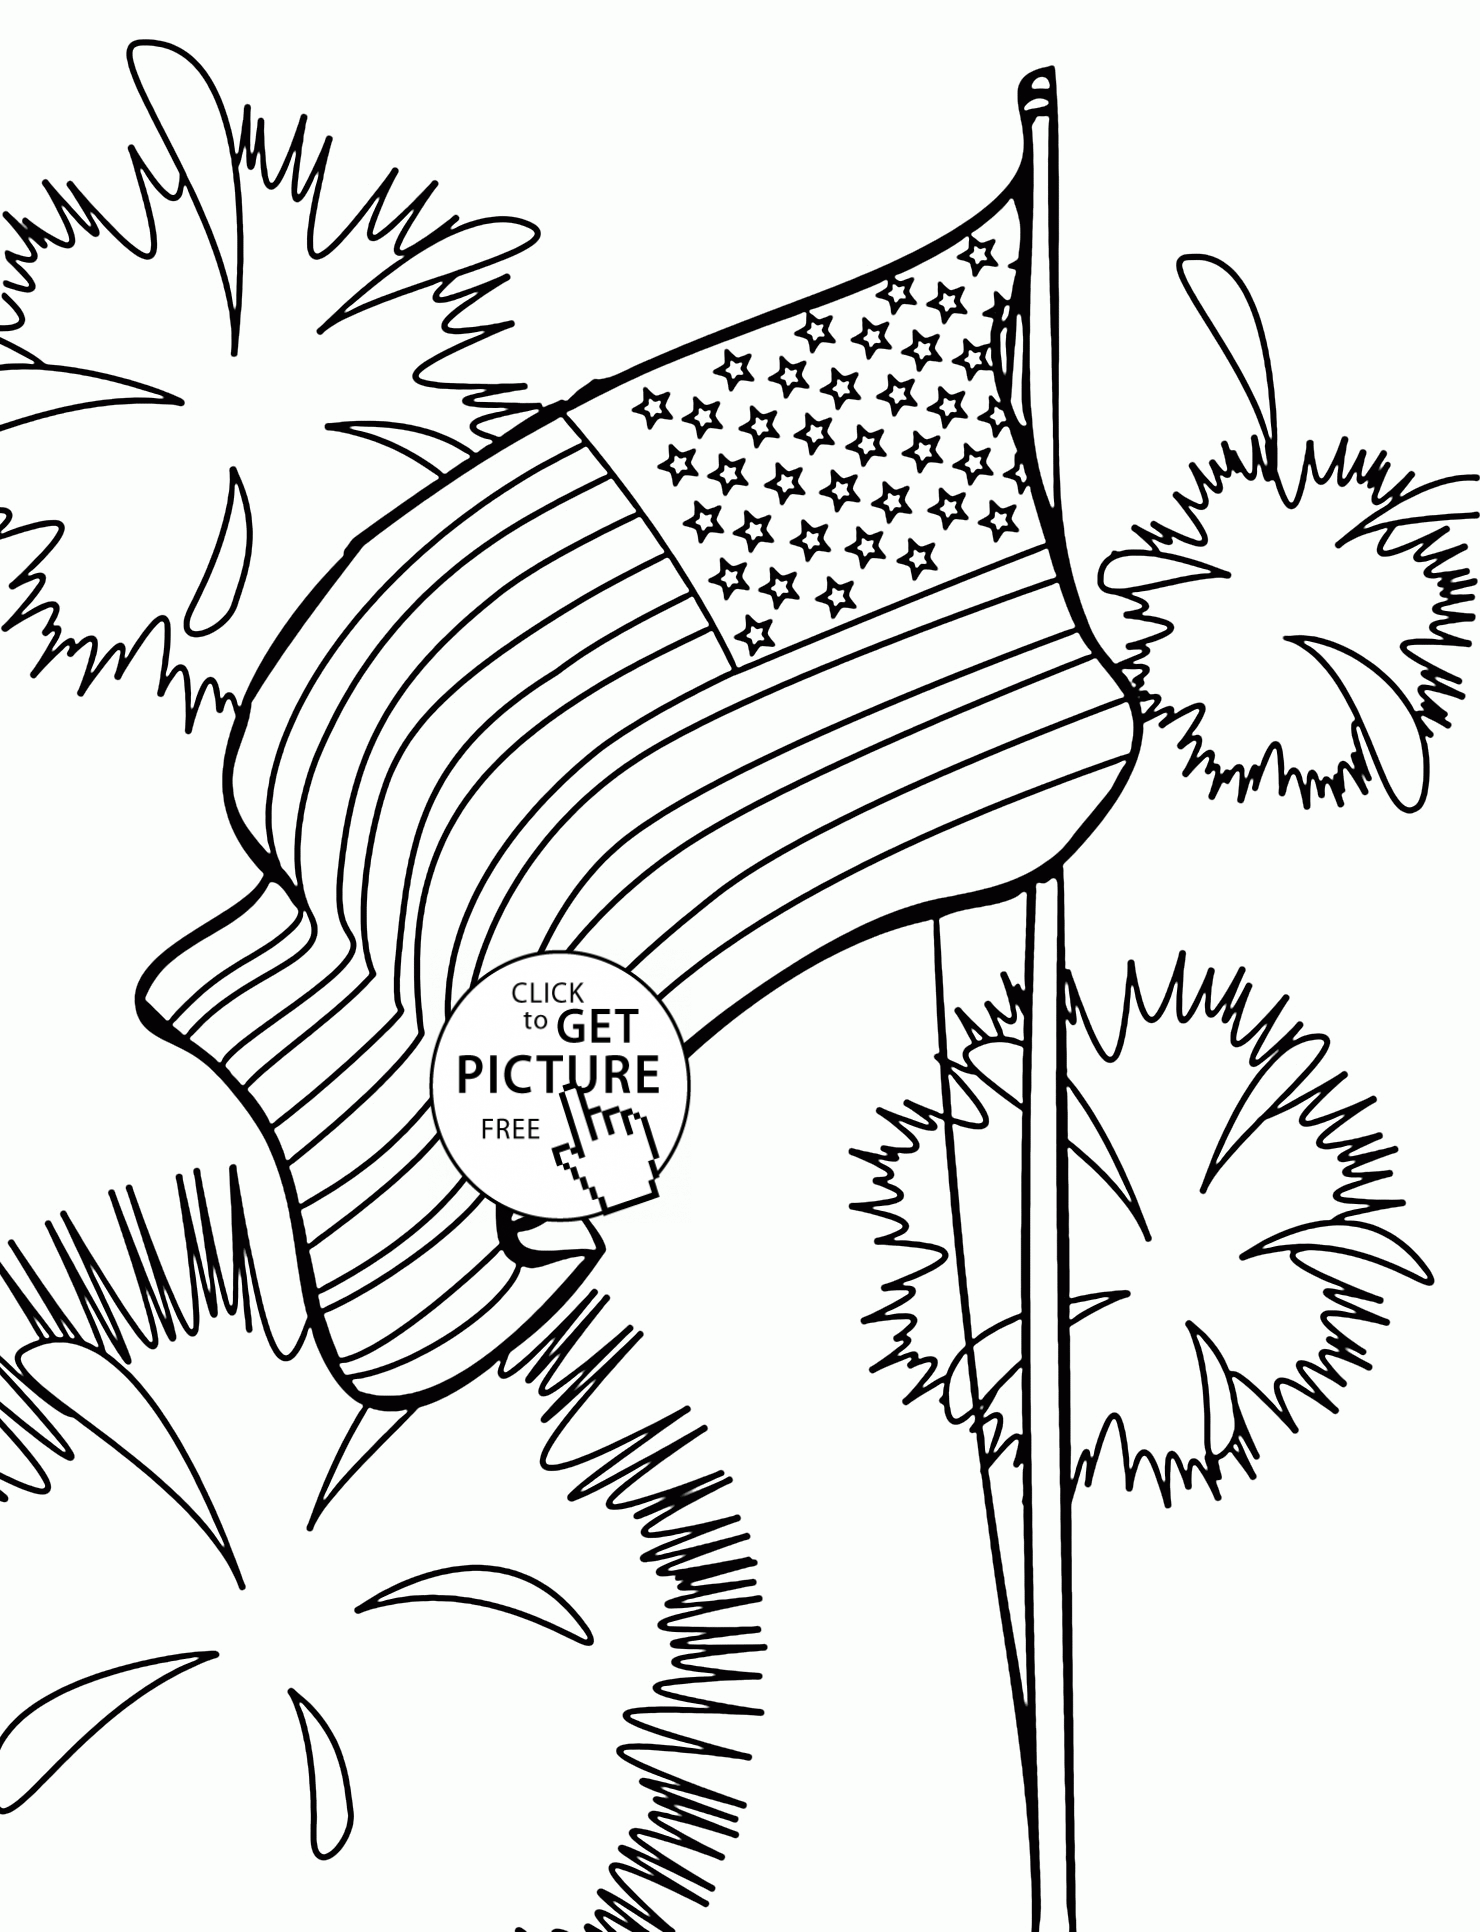 Flag and Fireworks - Fourth of July coloring page for kids ...